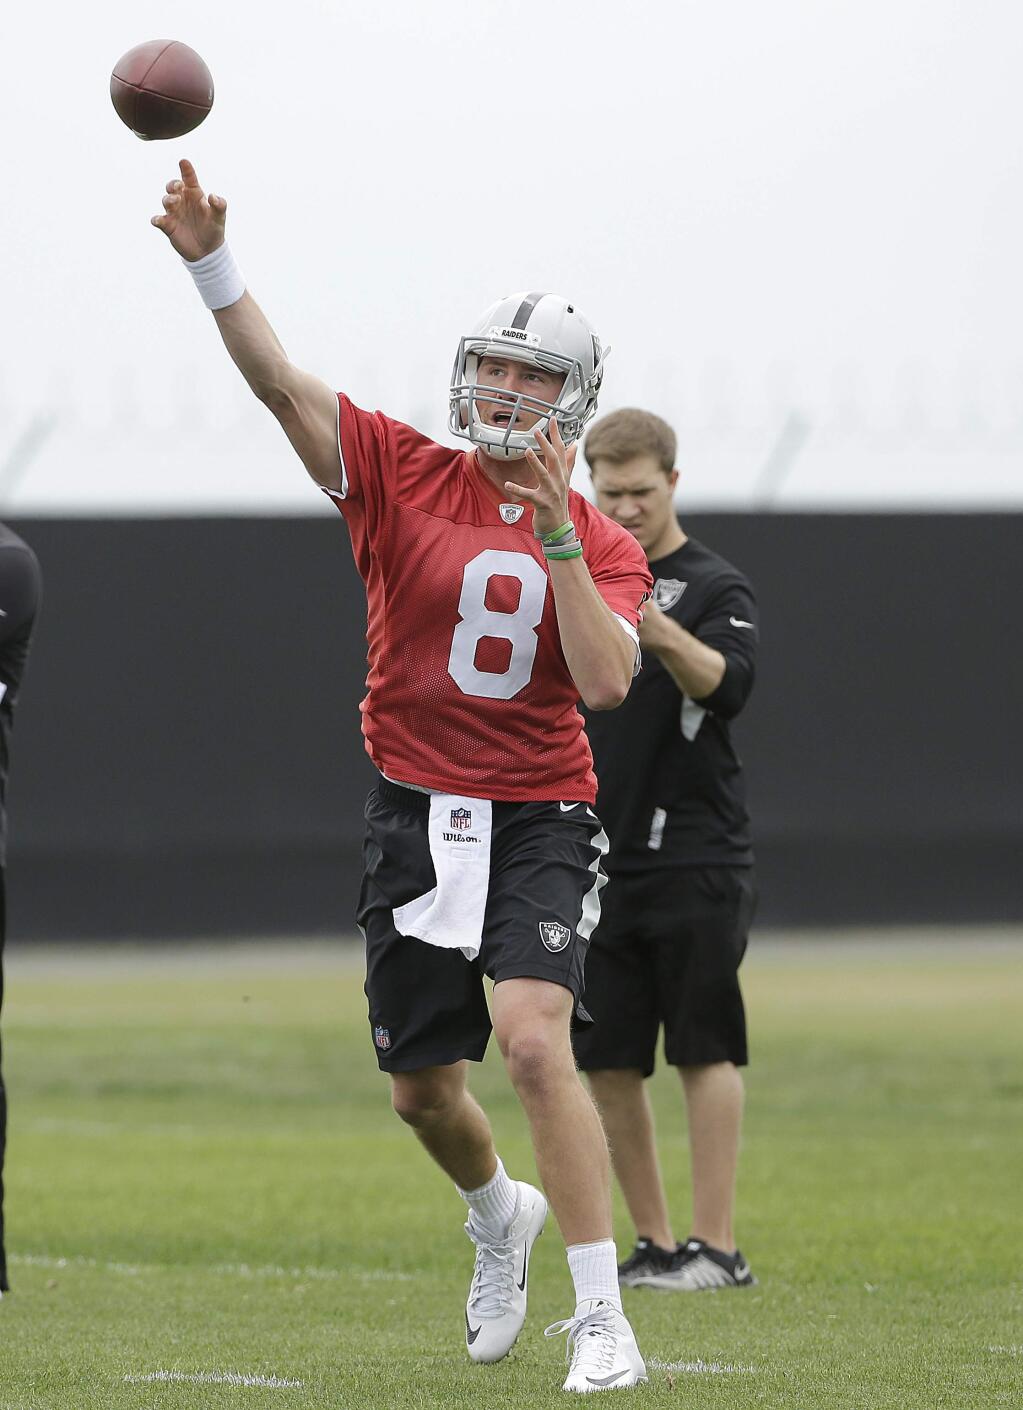 Oakland Raiders' Connor Cook throws during rookie minicamp in Alameda, CFriday, May 13, 2016. (AP Photo/Jeff Chiu)